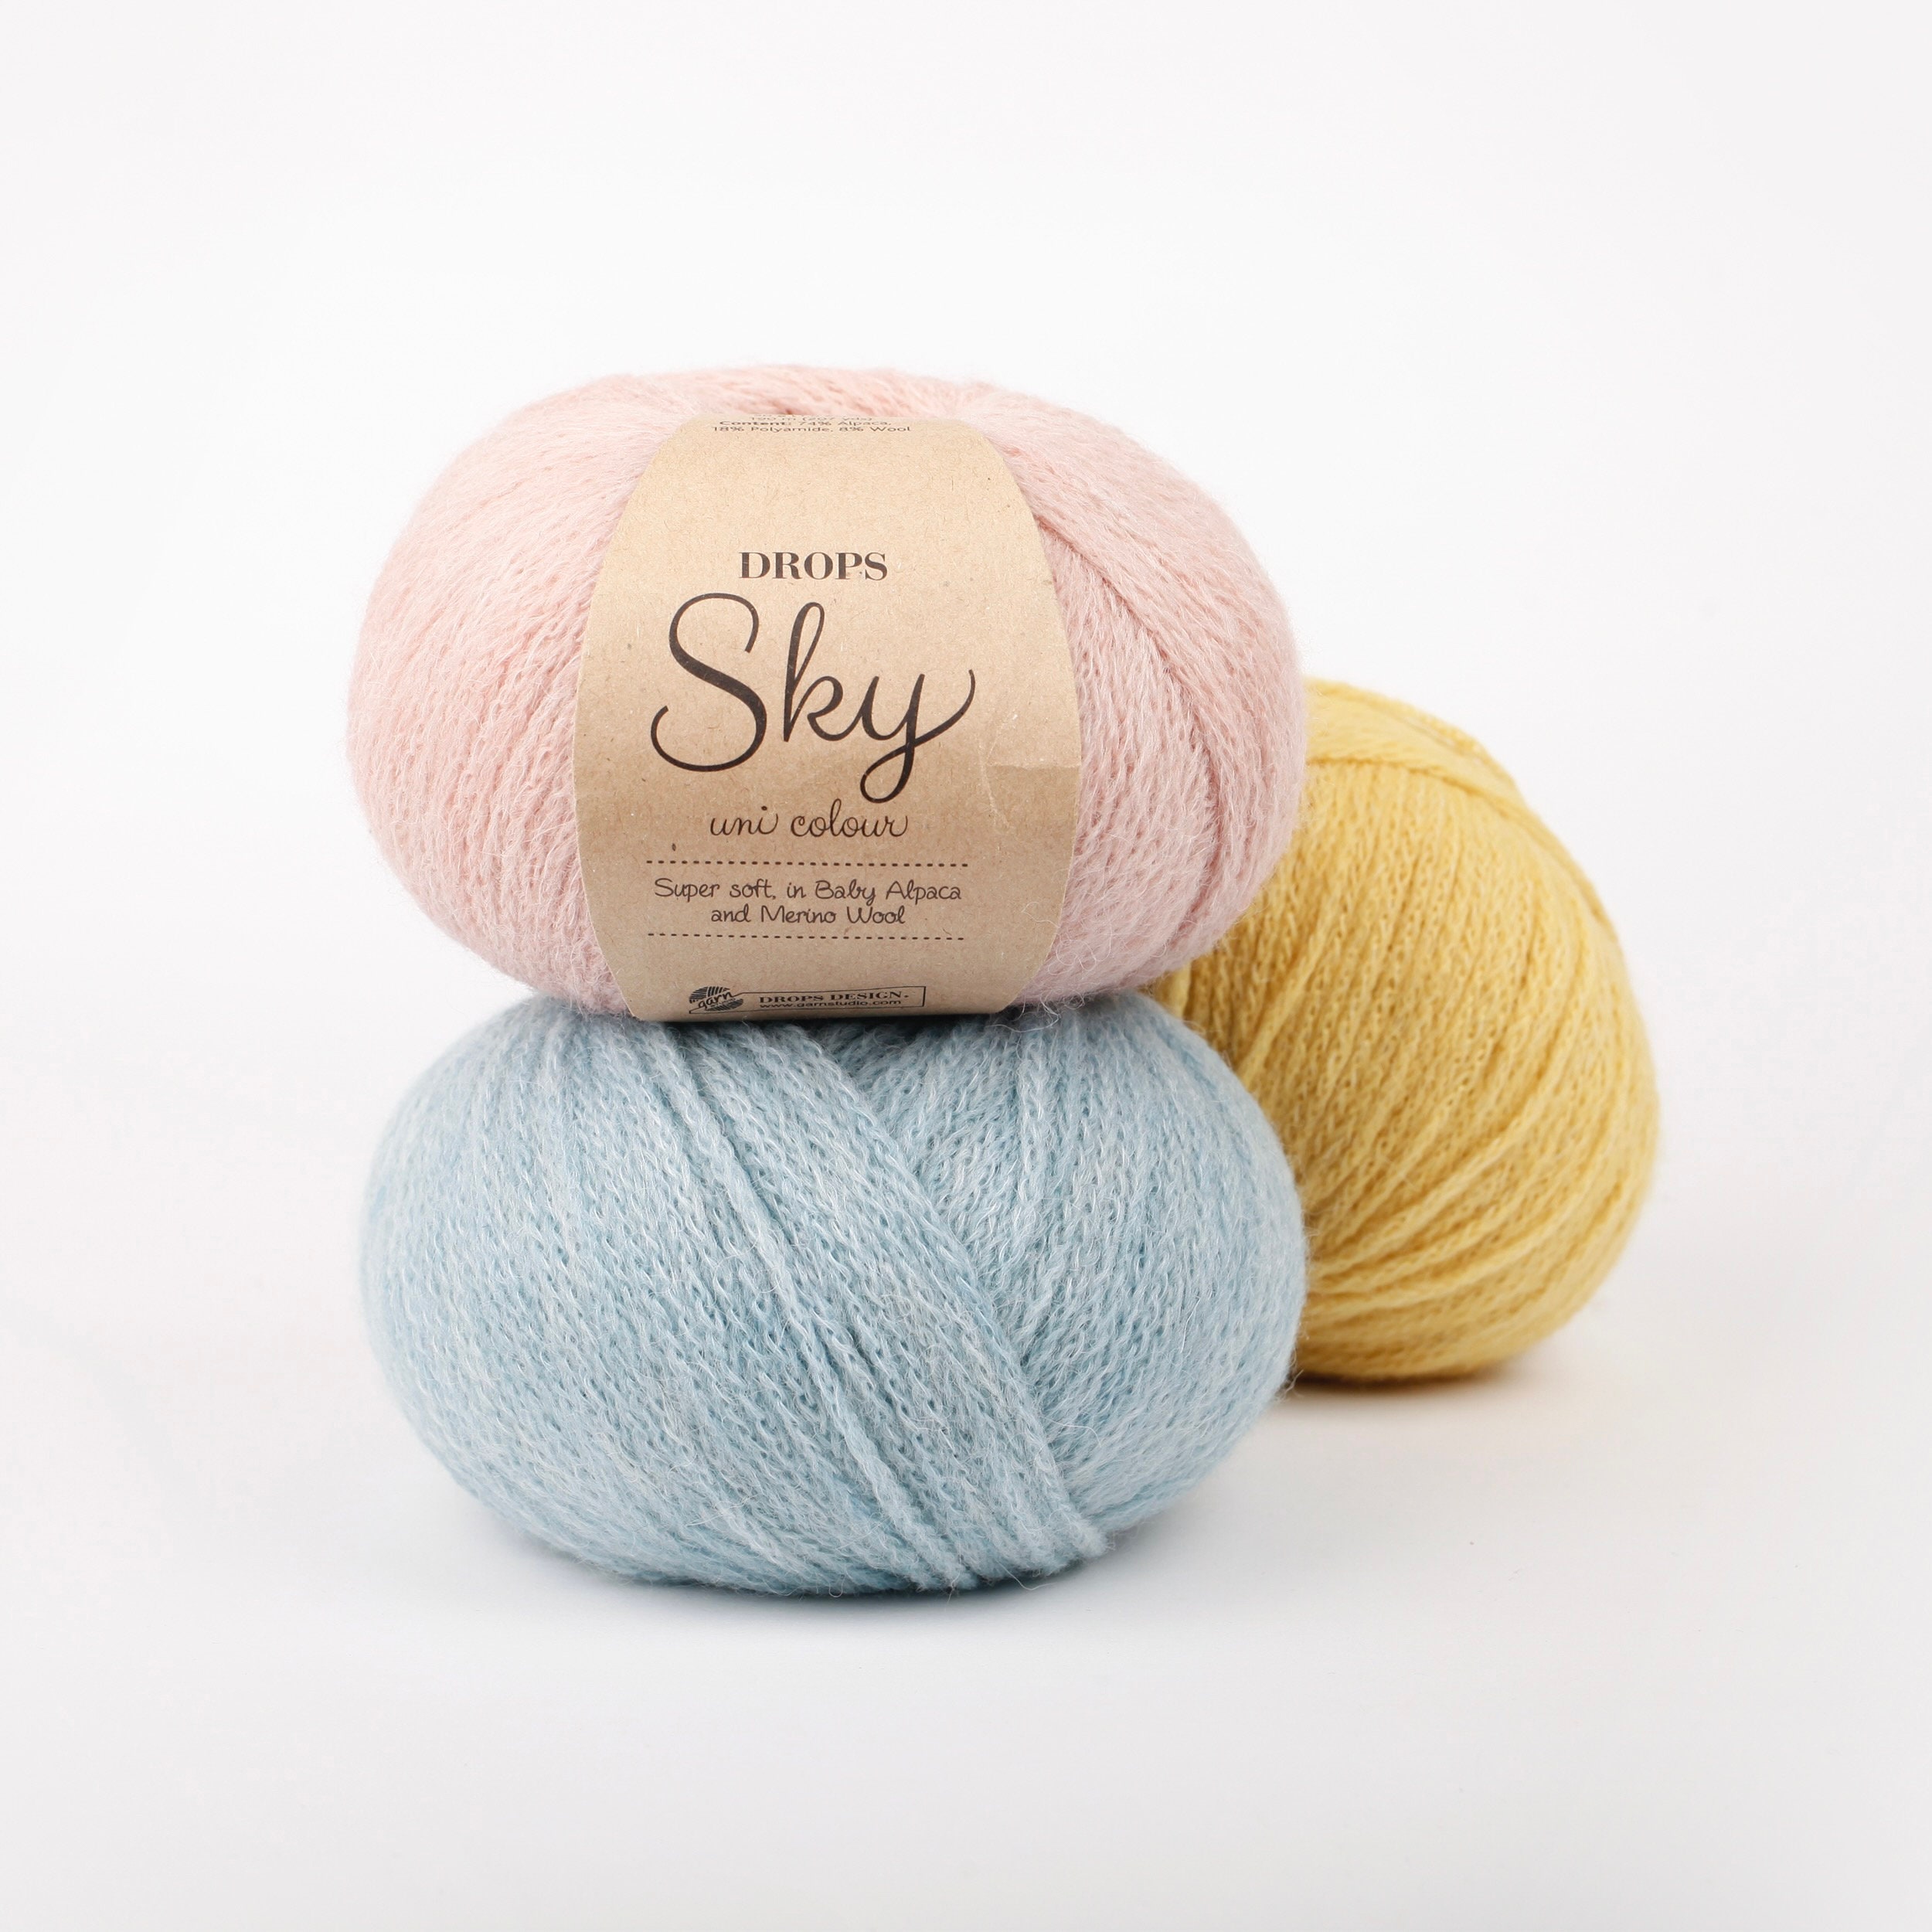 100% Baby Alpaca Yarn Wool Set of 3 Skeins DK Weight - Made in Peru -  Heavenly Soft and Perfect for Knitting and Crocheting (Baby Pink, DK)